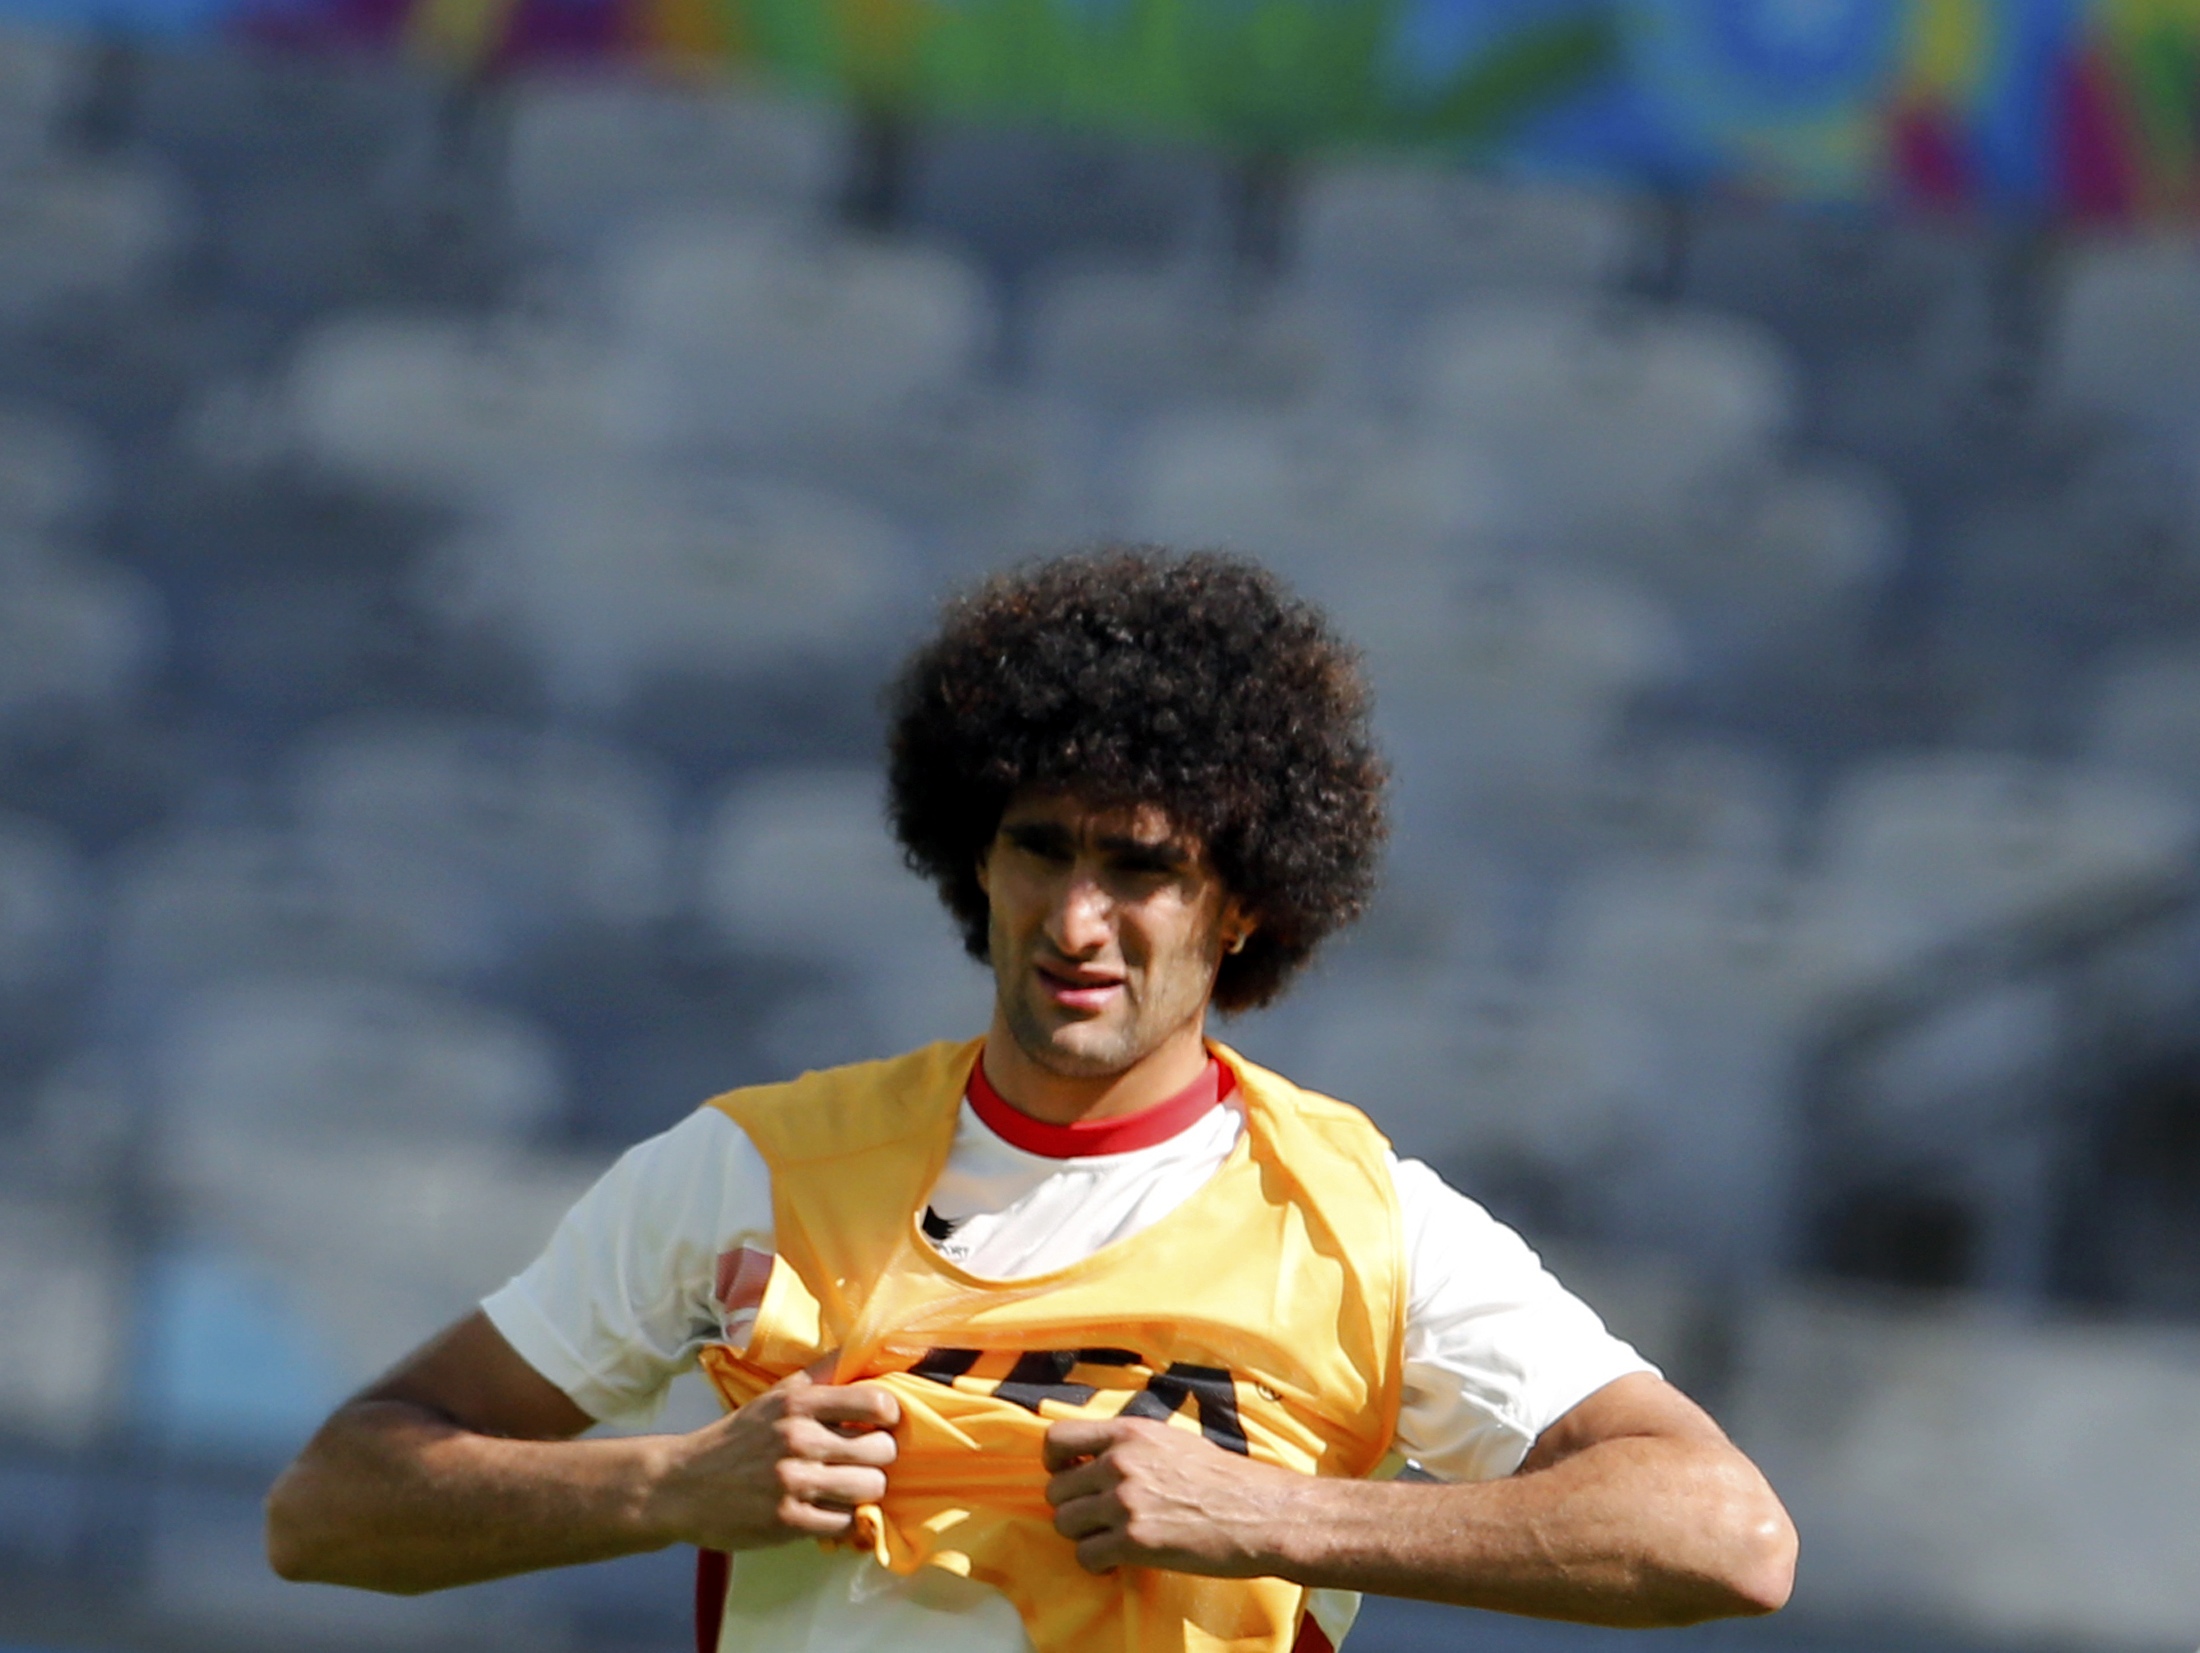 Belgium's national soccer team player Marouane Fellaini puts on a vest as he attends a training session at the Mineirao stadium in Belo Horizonte June 16, 2014. Belgium will face Algeria in their first 2014 World Cup Group H soccer match on June 17. REUTE